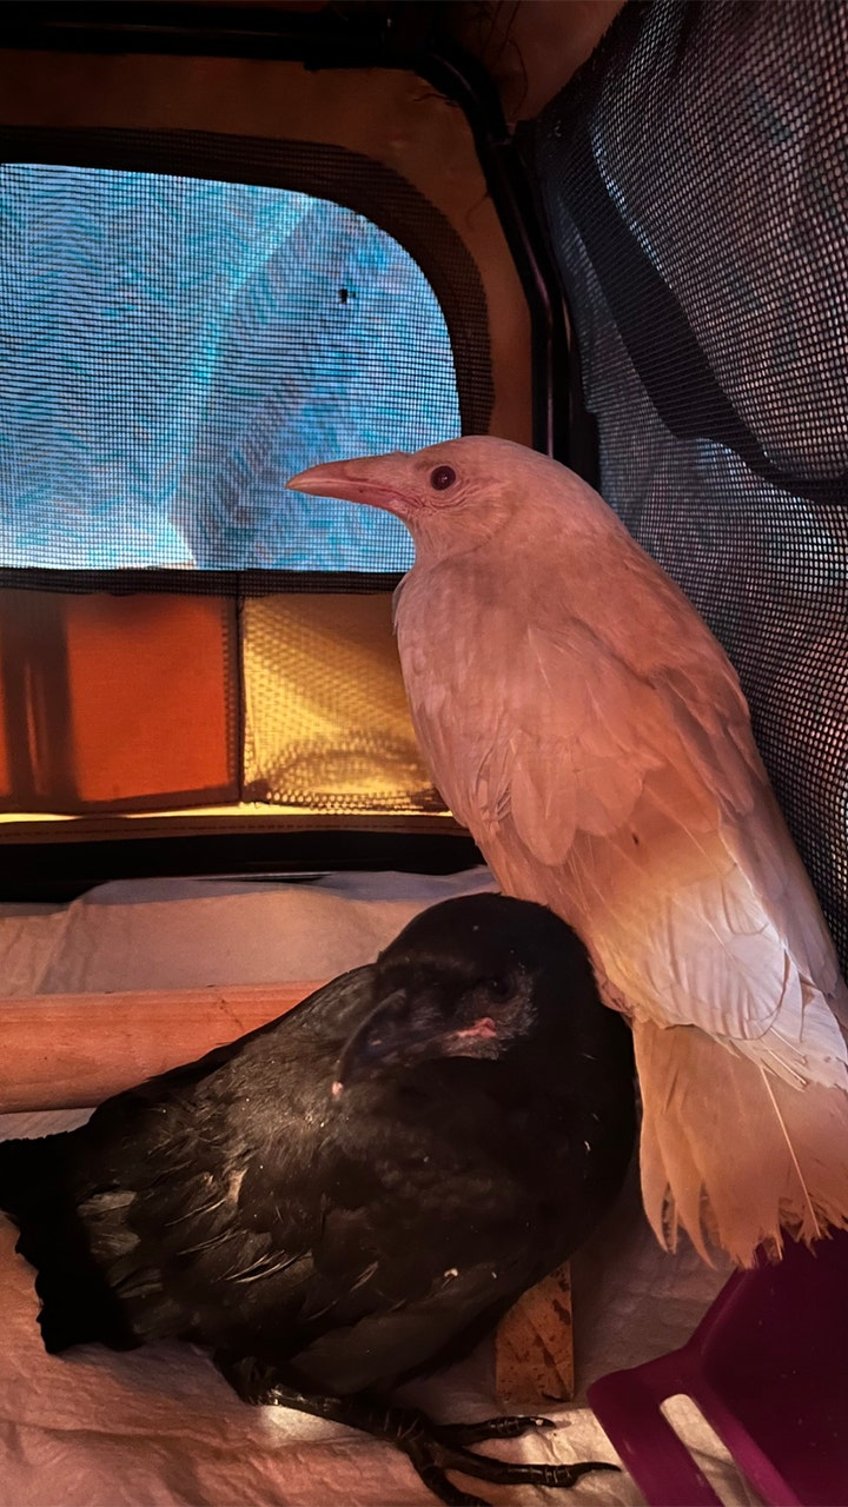 rare albino crow found in connecticut unable to fly a special bird